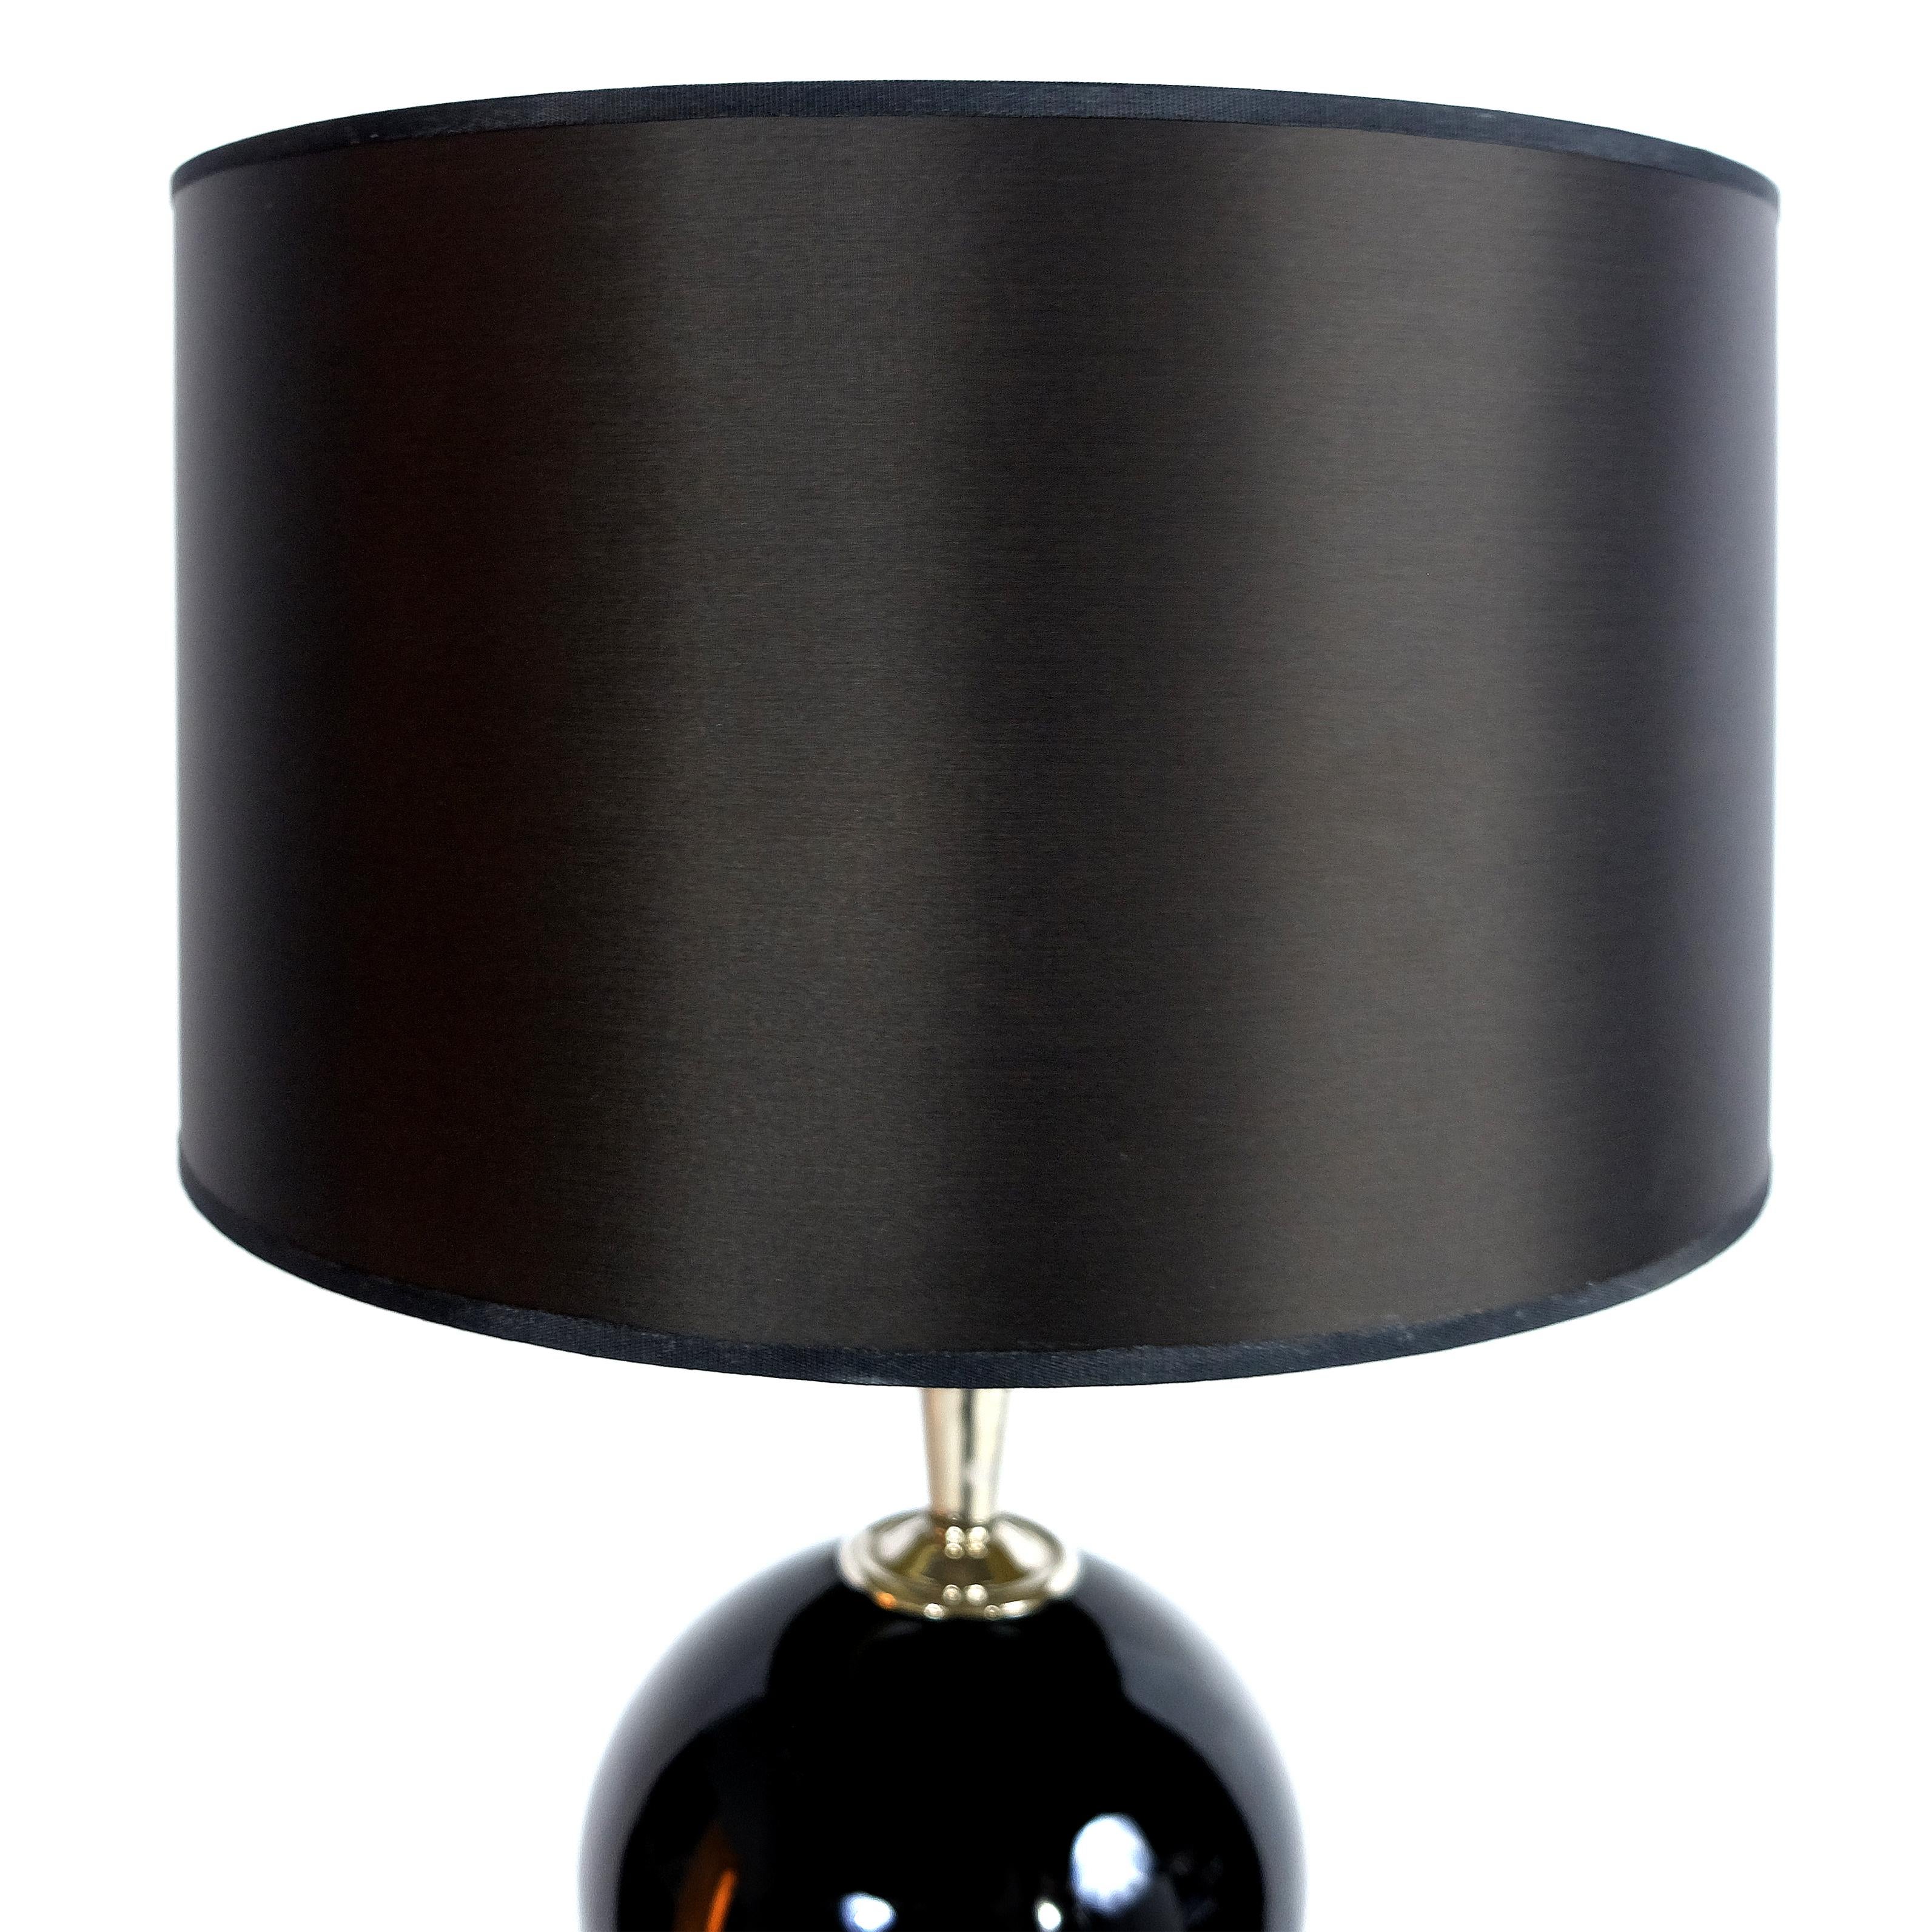 Laudarte Srl Lume Yago table lamp in nickel and glass, pair available offered for sale is a stunning black glass table lamp from Leo Mirai Collezione of Laudarte Srl with a nickel finish. The Leo Mirai collection grew from the prestigious collection